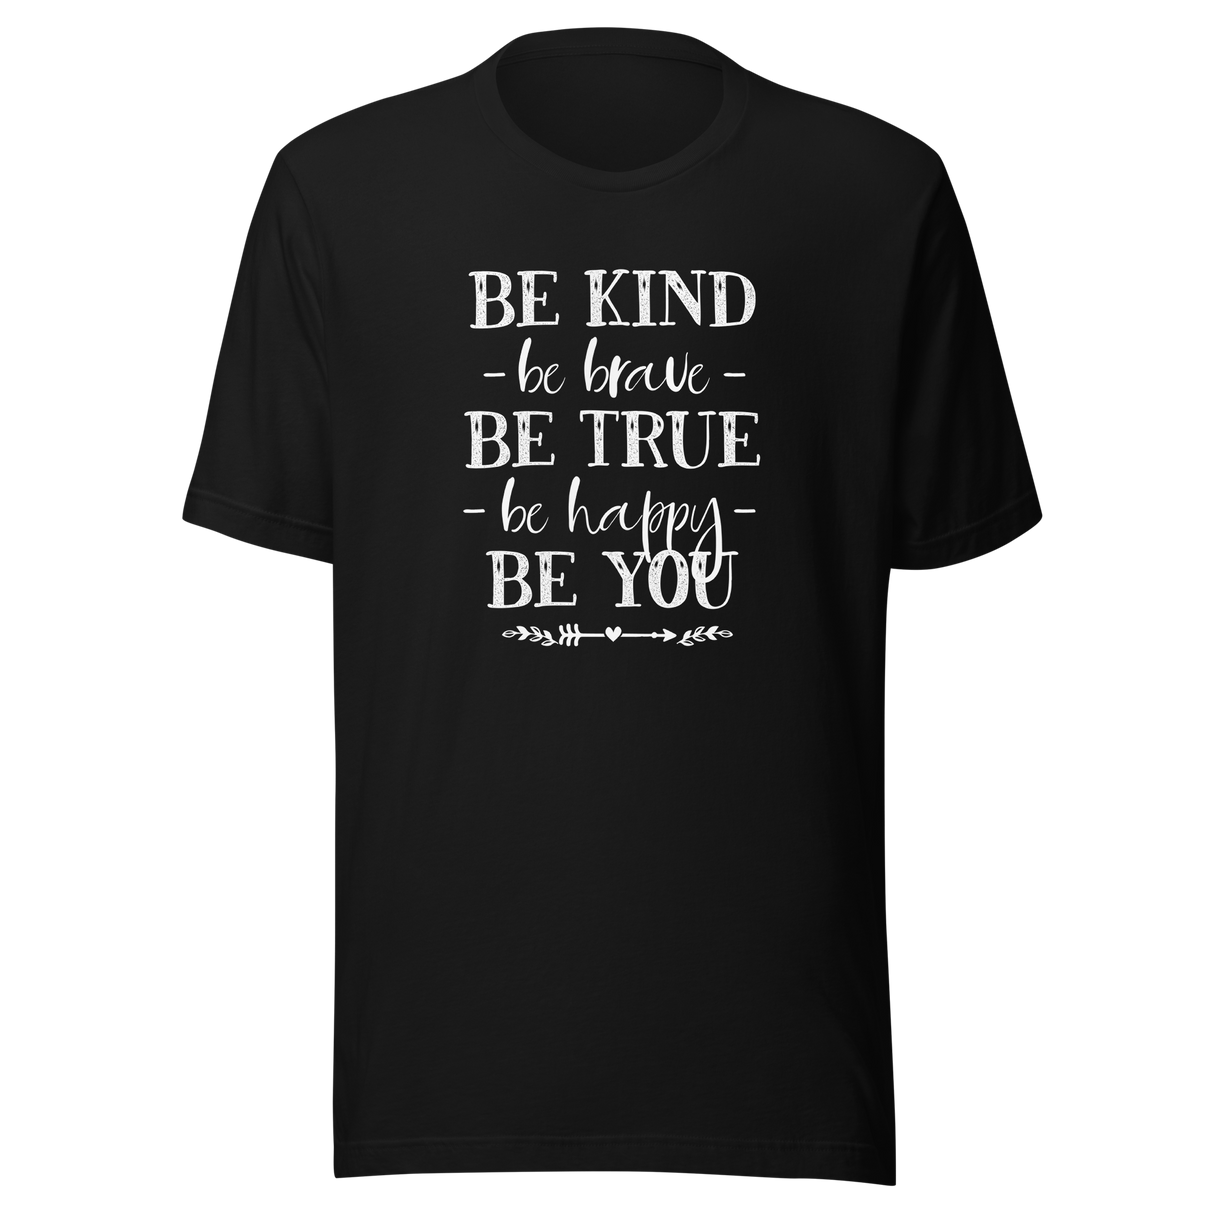 be-kind-be-brave-be-true-be-happy-be-you-life-tee-kindness-t-shirt-bravery-tee-truth-t-shirt-happiness-tee#color_black